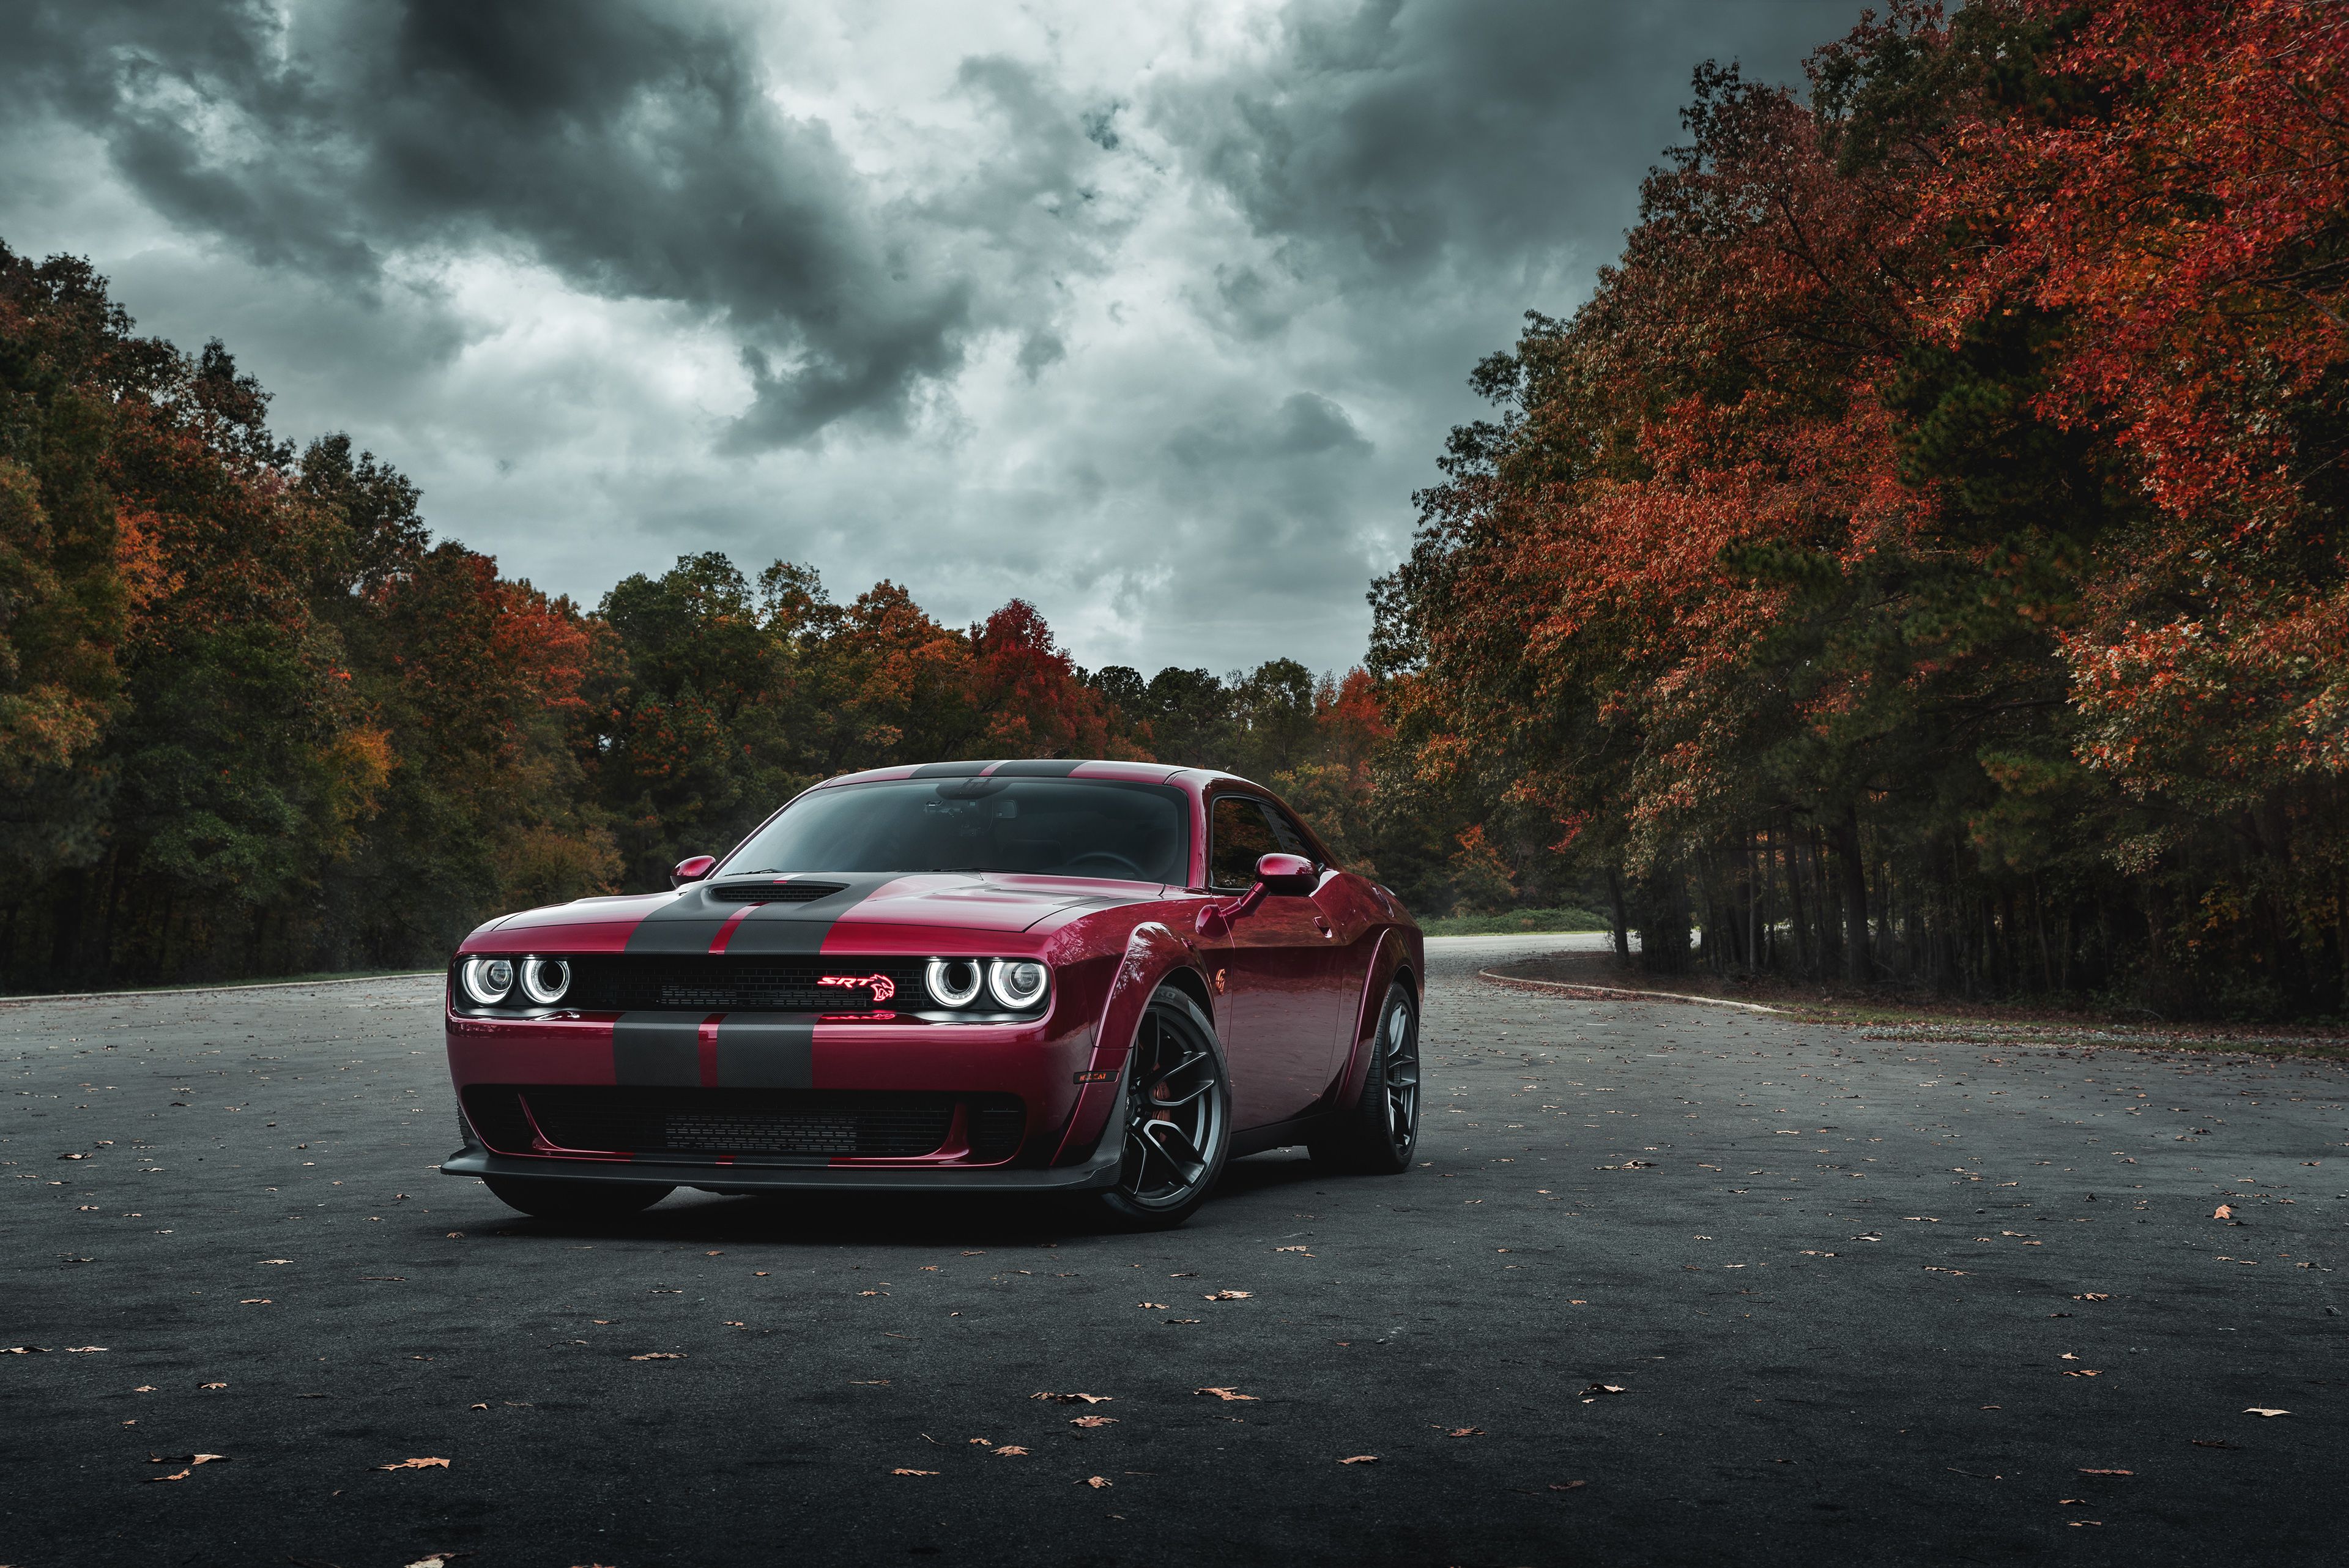 Dodge Charger Srt Hellcat Redeye Wallpapers